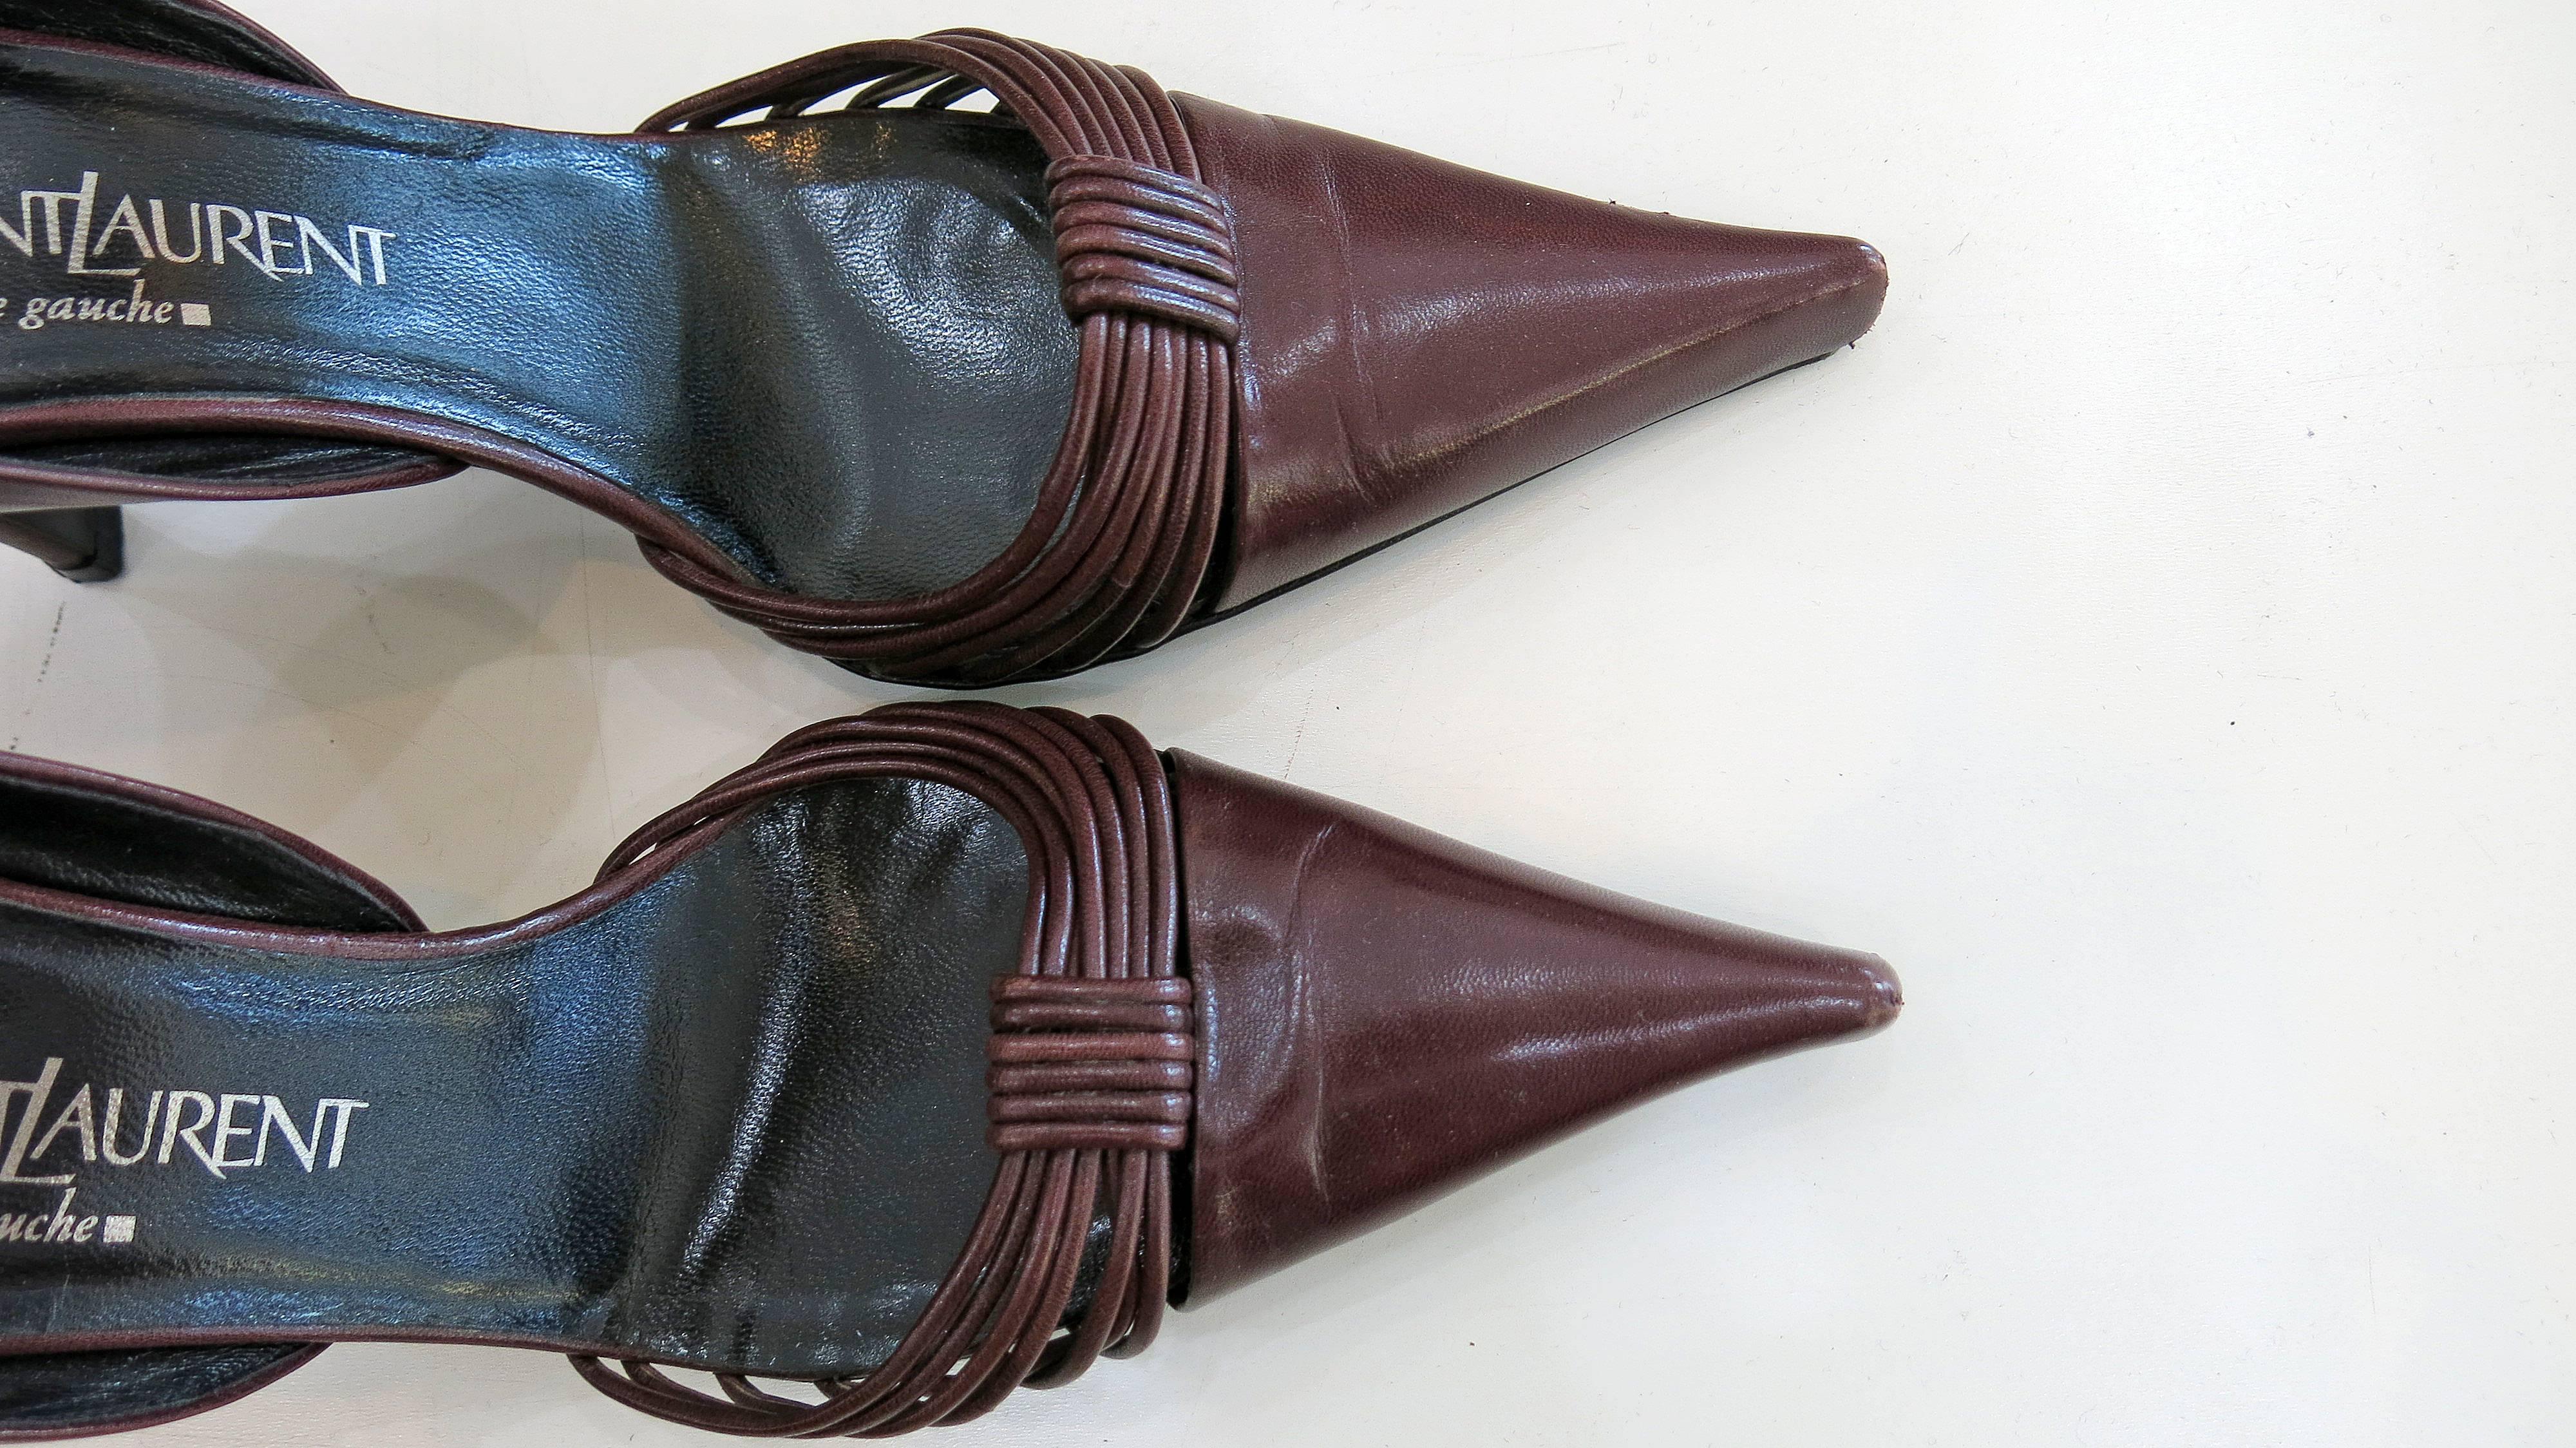 Maroon 3.5 inch heels with pointed toe. Leather upper and soles. Made in Italy. Leather 